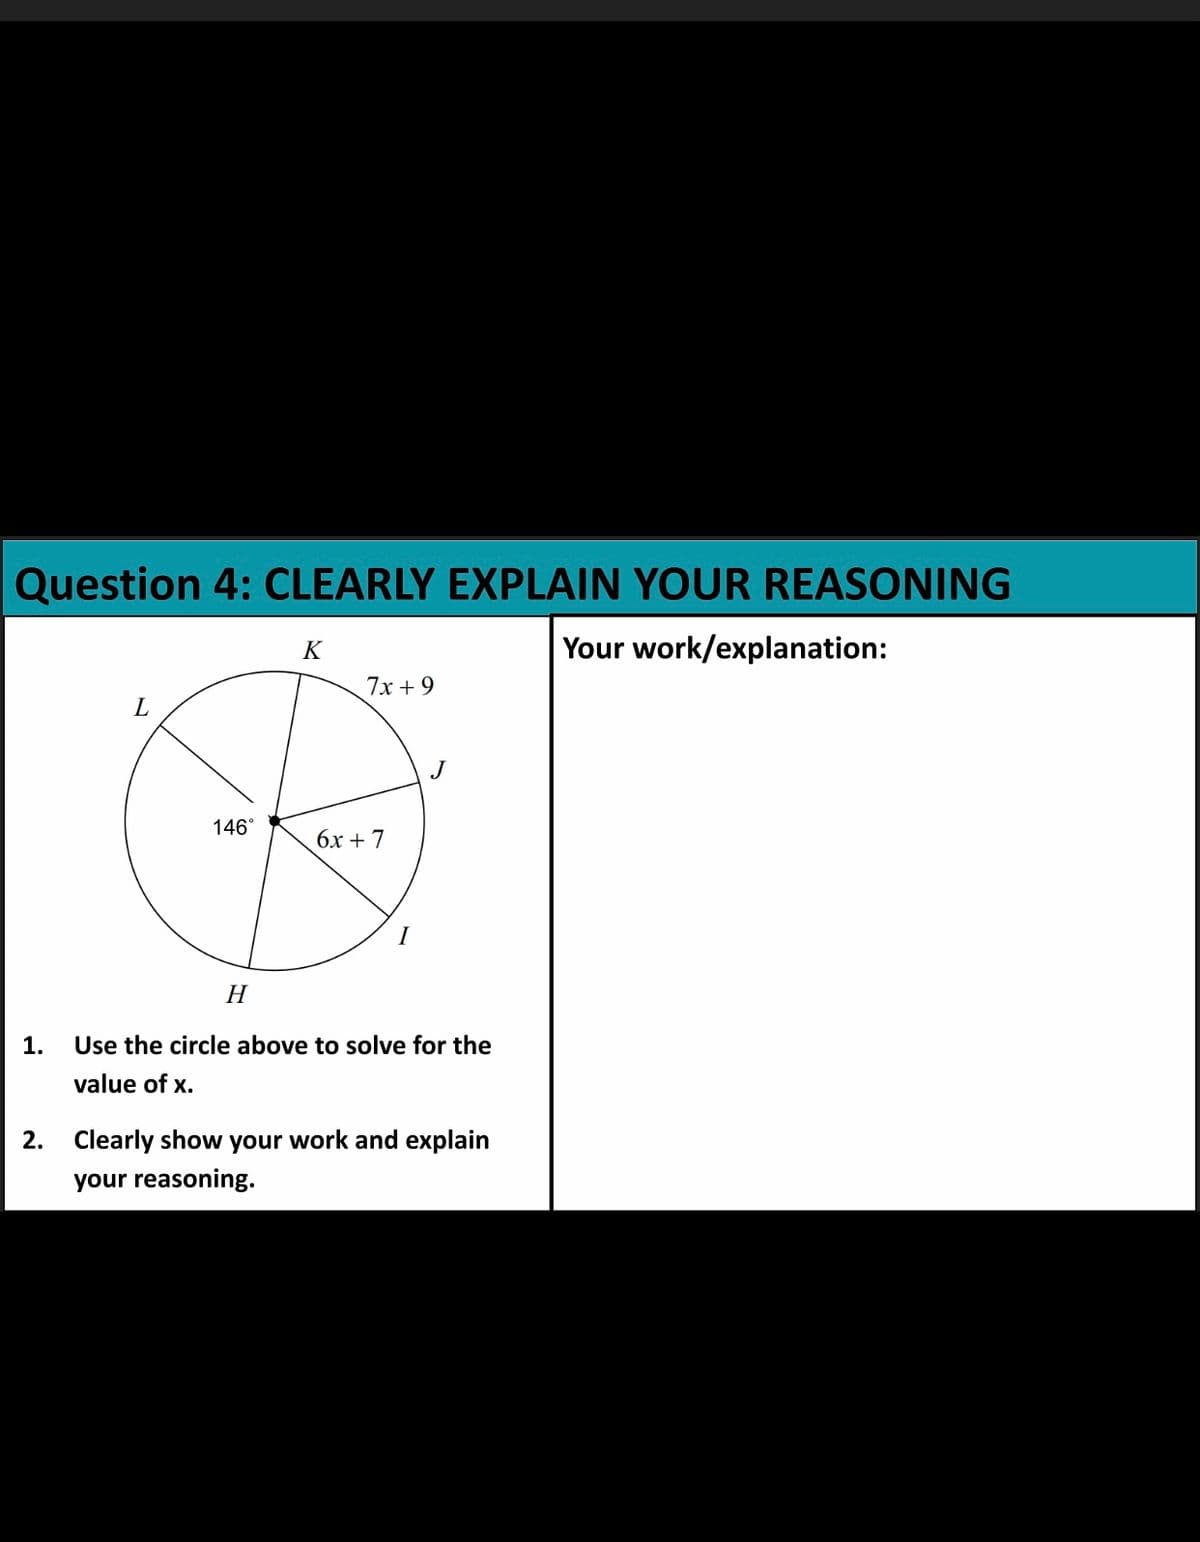 Question 4: CLEARLY EXPLAIN YOUR REASONING
K
Your work/explanation:
7х + 9
L
146°
бх + 7
Н
1.
Use the circle above to solve for the
value of x.
2. Clearly show your work and explain
your reasoning.
